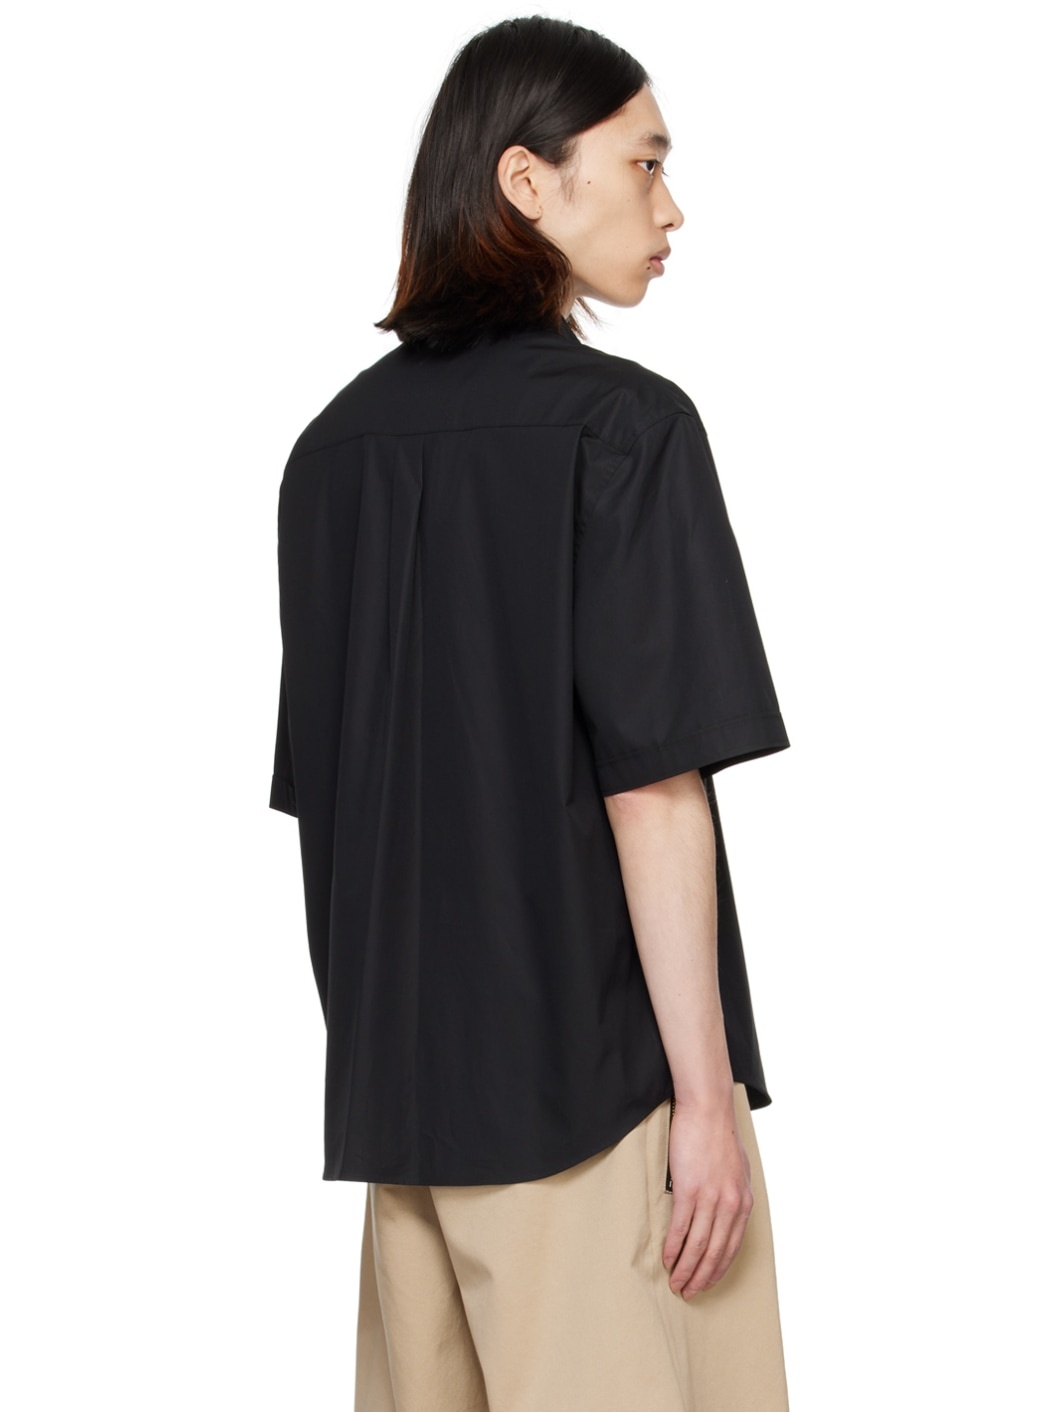 Black Embroidered Shirt - 3